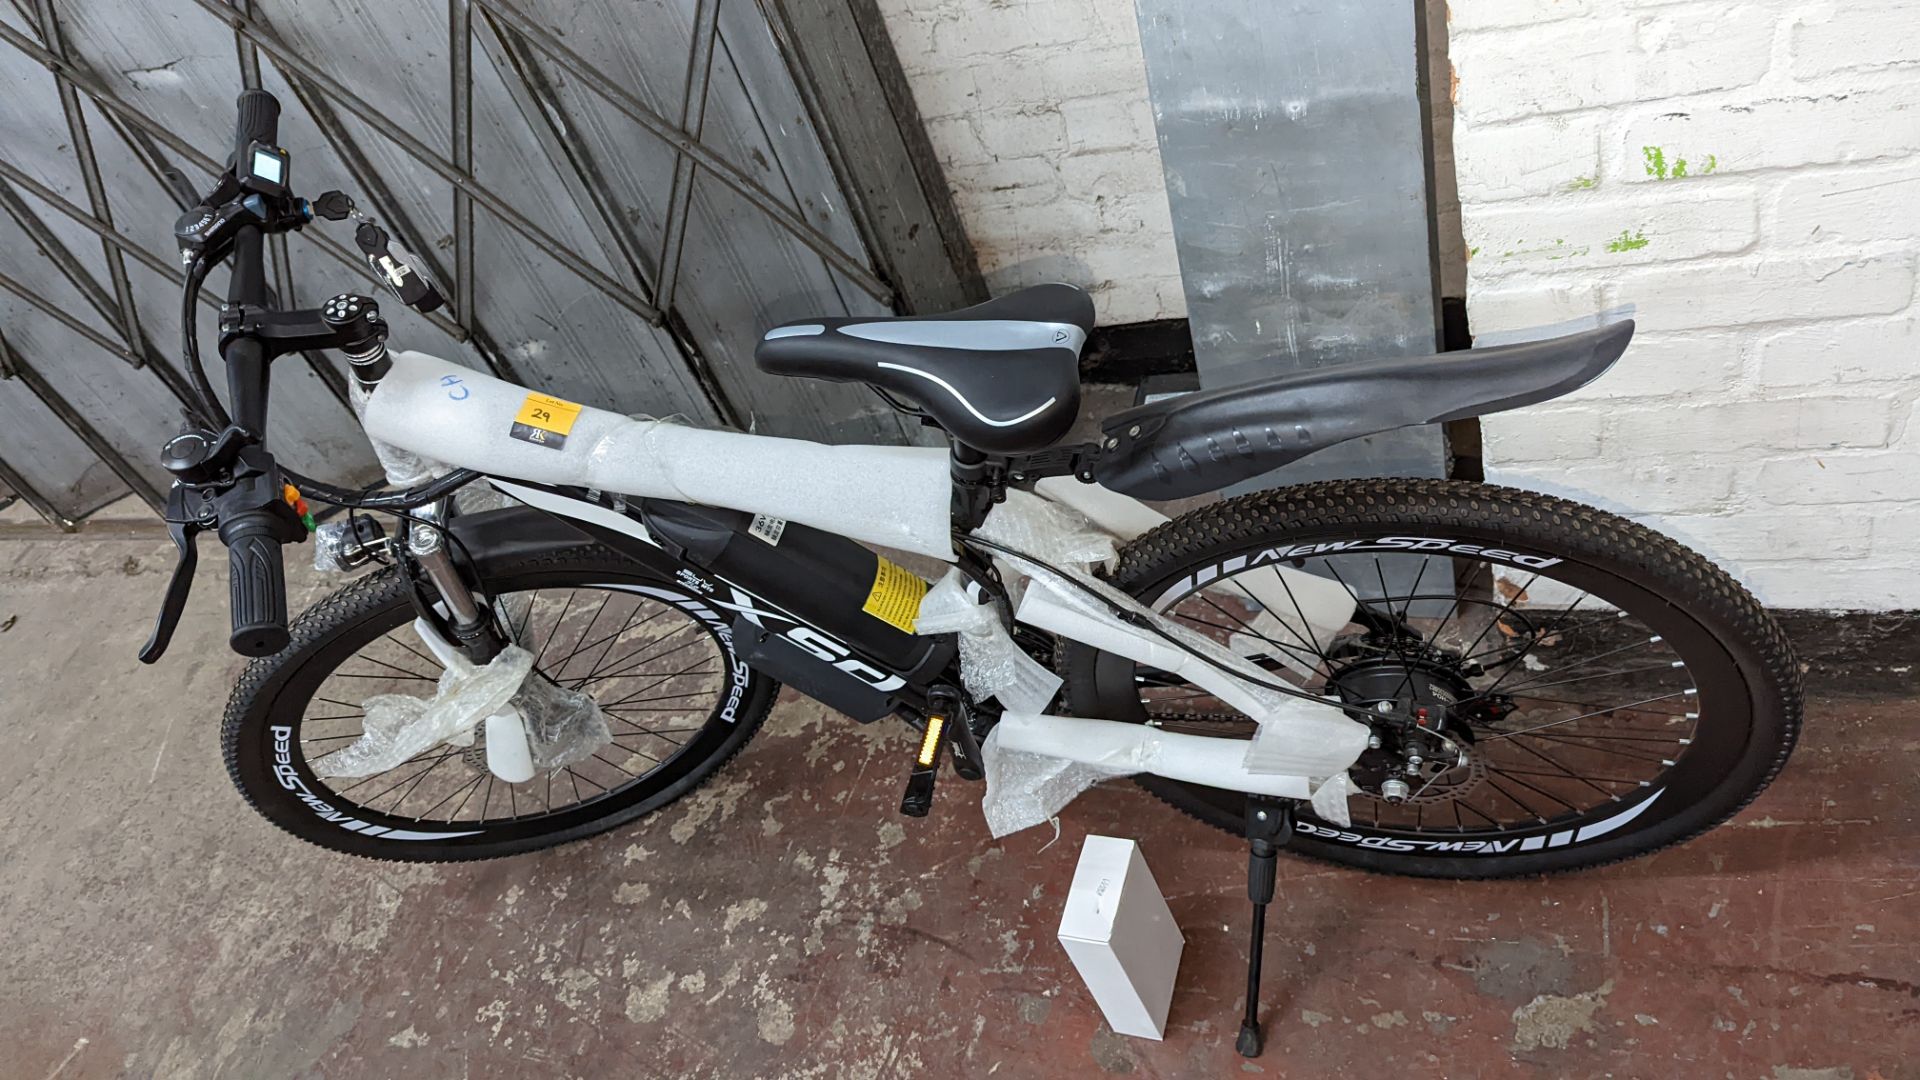 XSD FTX Sport MTB 7.5 Racing electric bike with Shimano Tourney TZ gears. Includes 36v 12AH battery, - Image 4 of 16